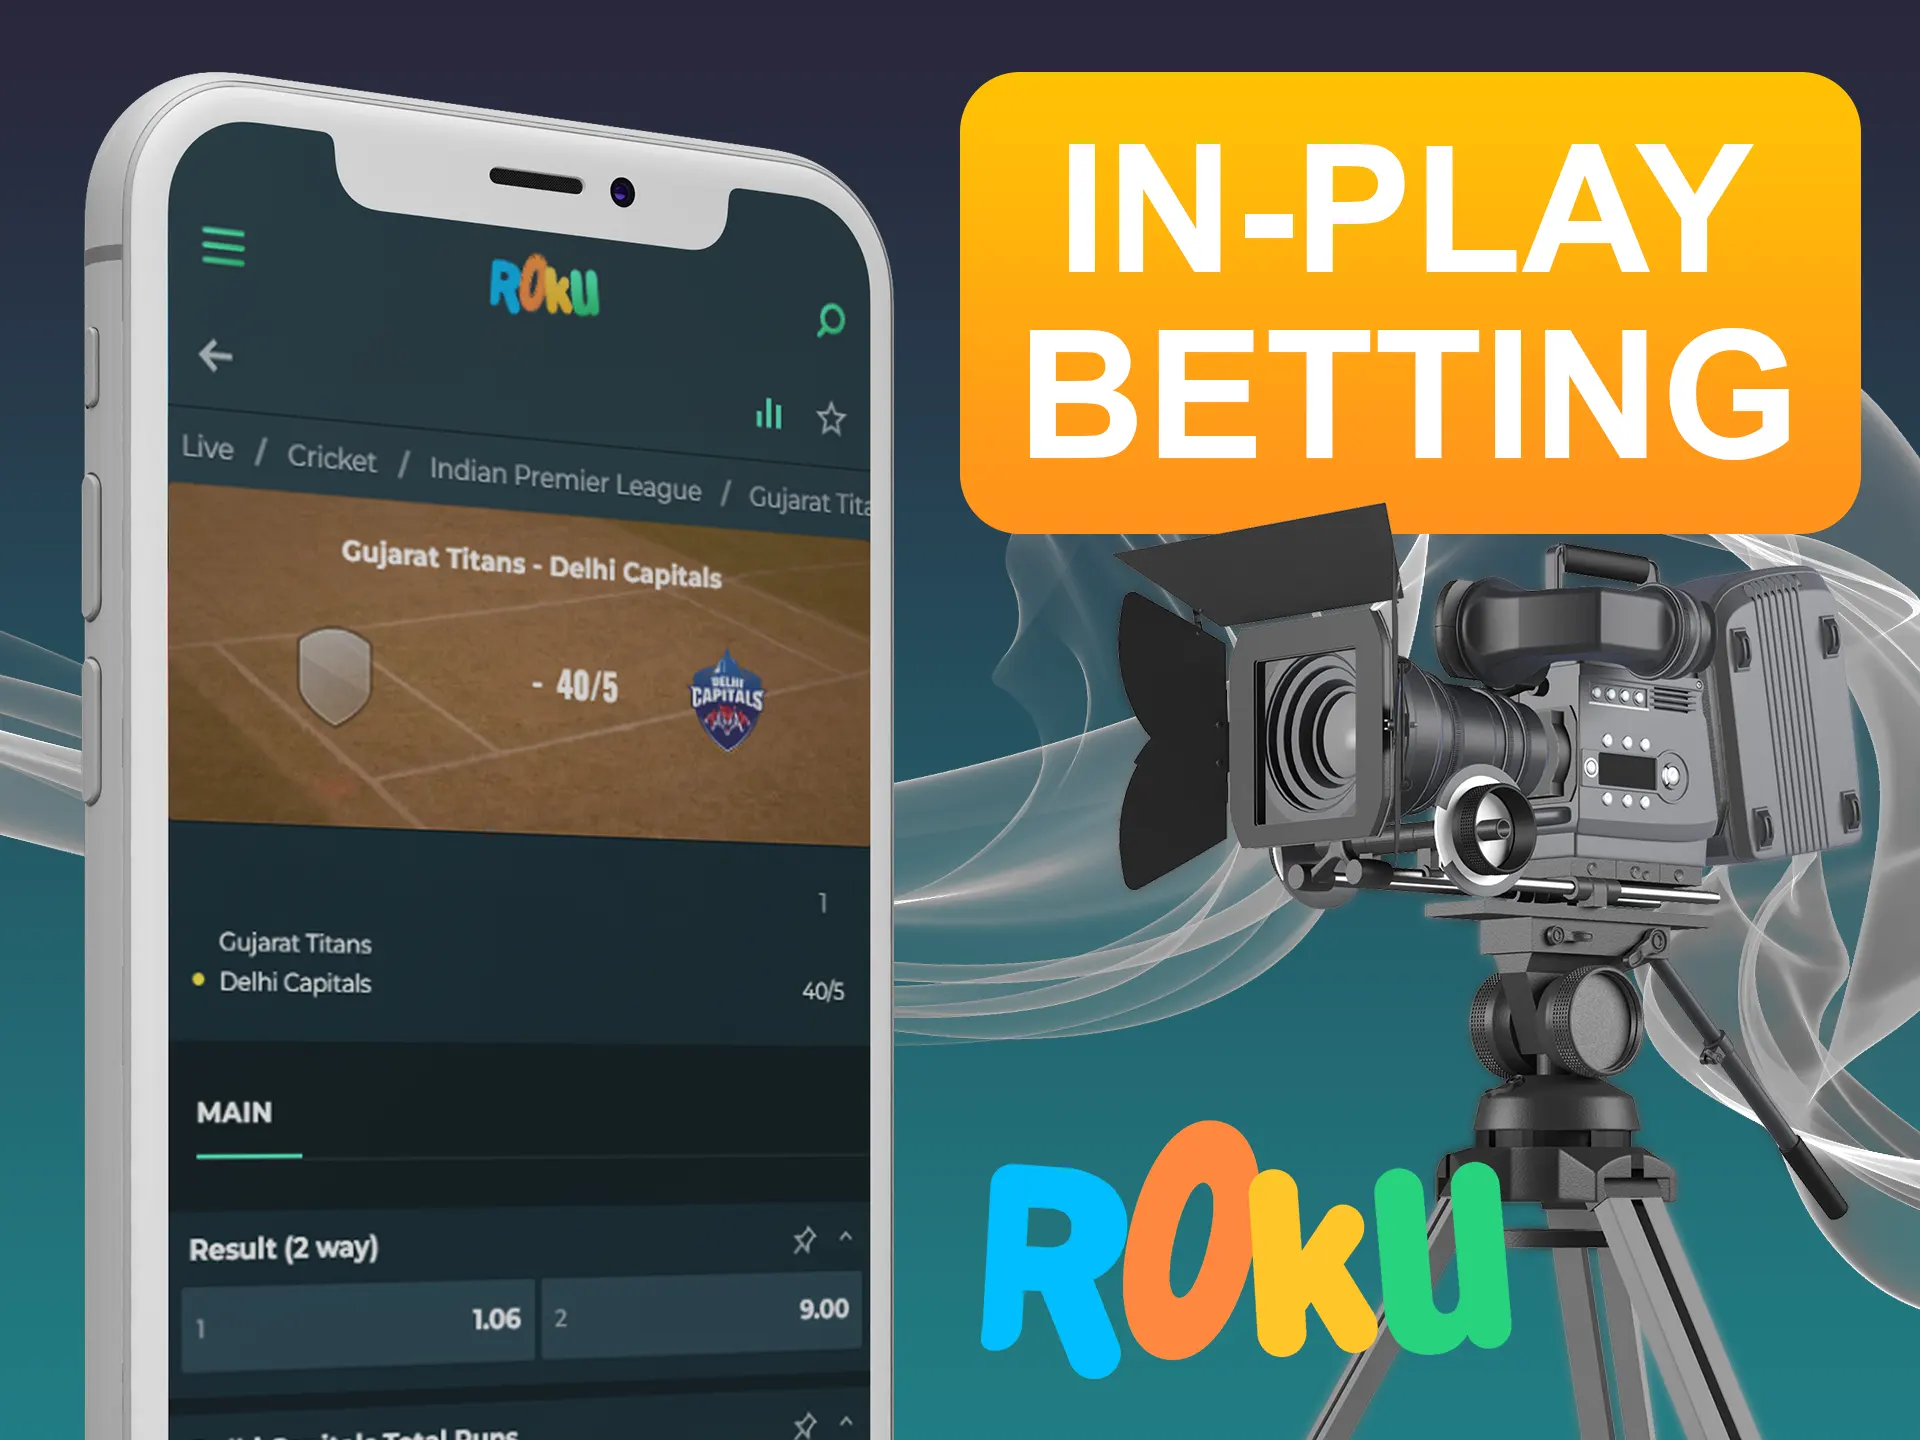 Bet on current matches in live format at Rokubet.